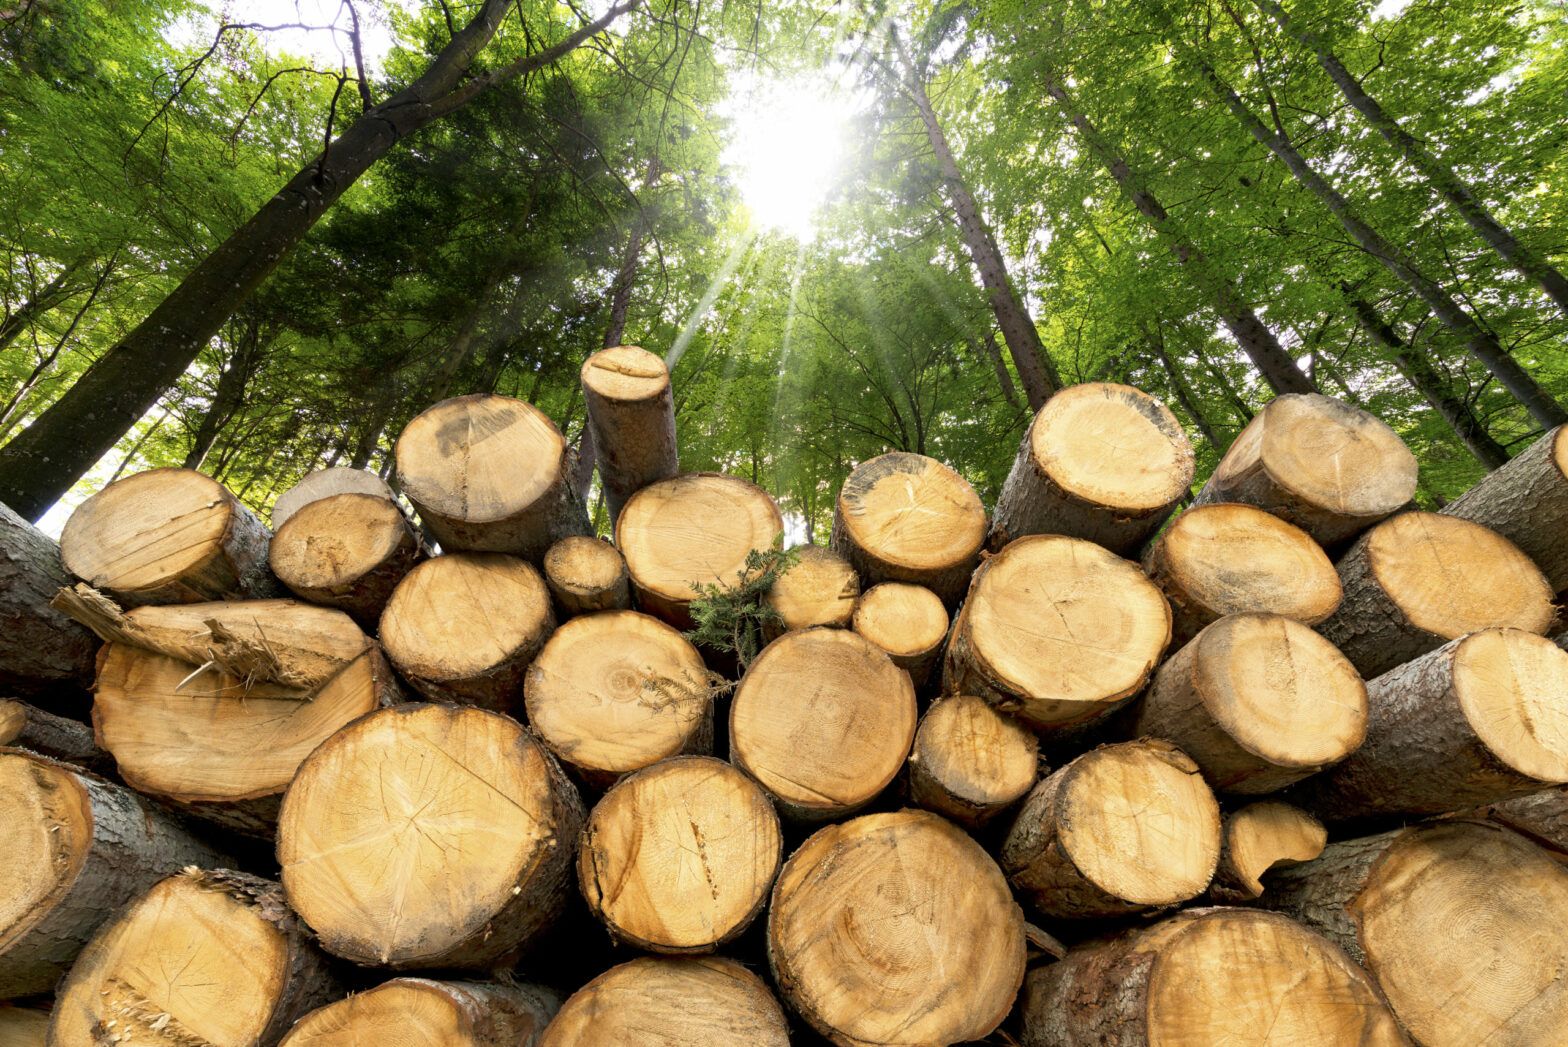 Wood products are a climate change solution